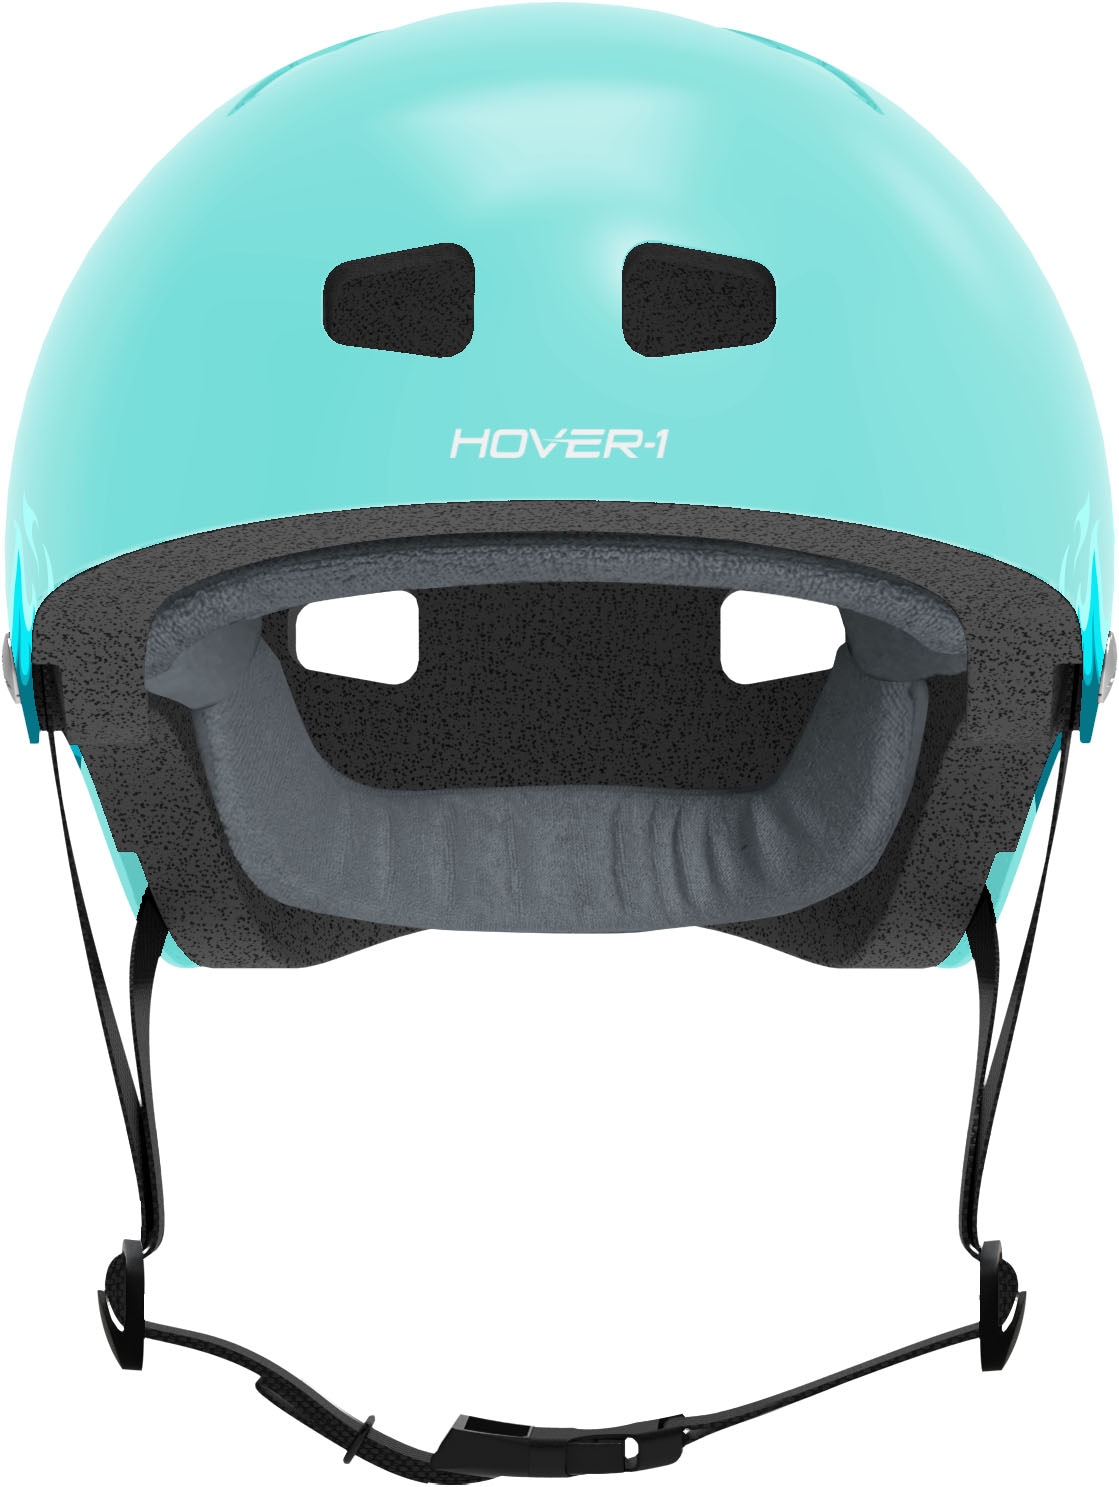 Hover-1 Blue Sports Helmet with Removable Washable Liner and Secure ...